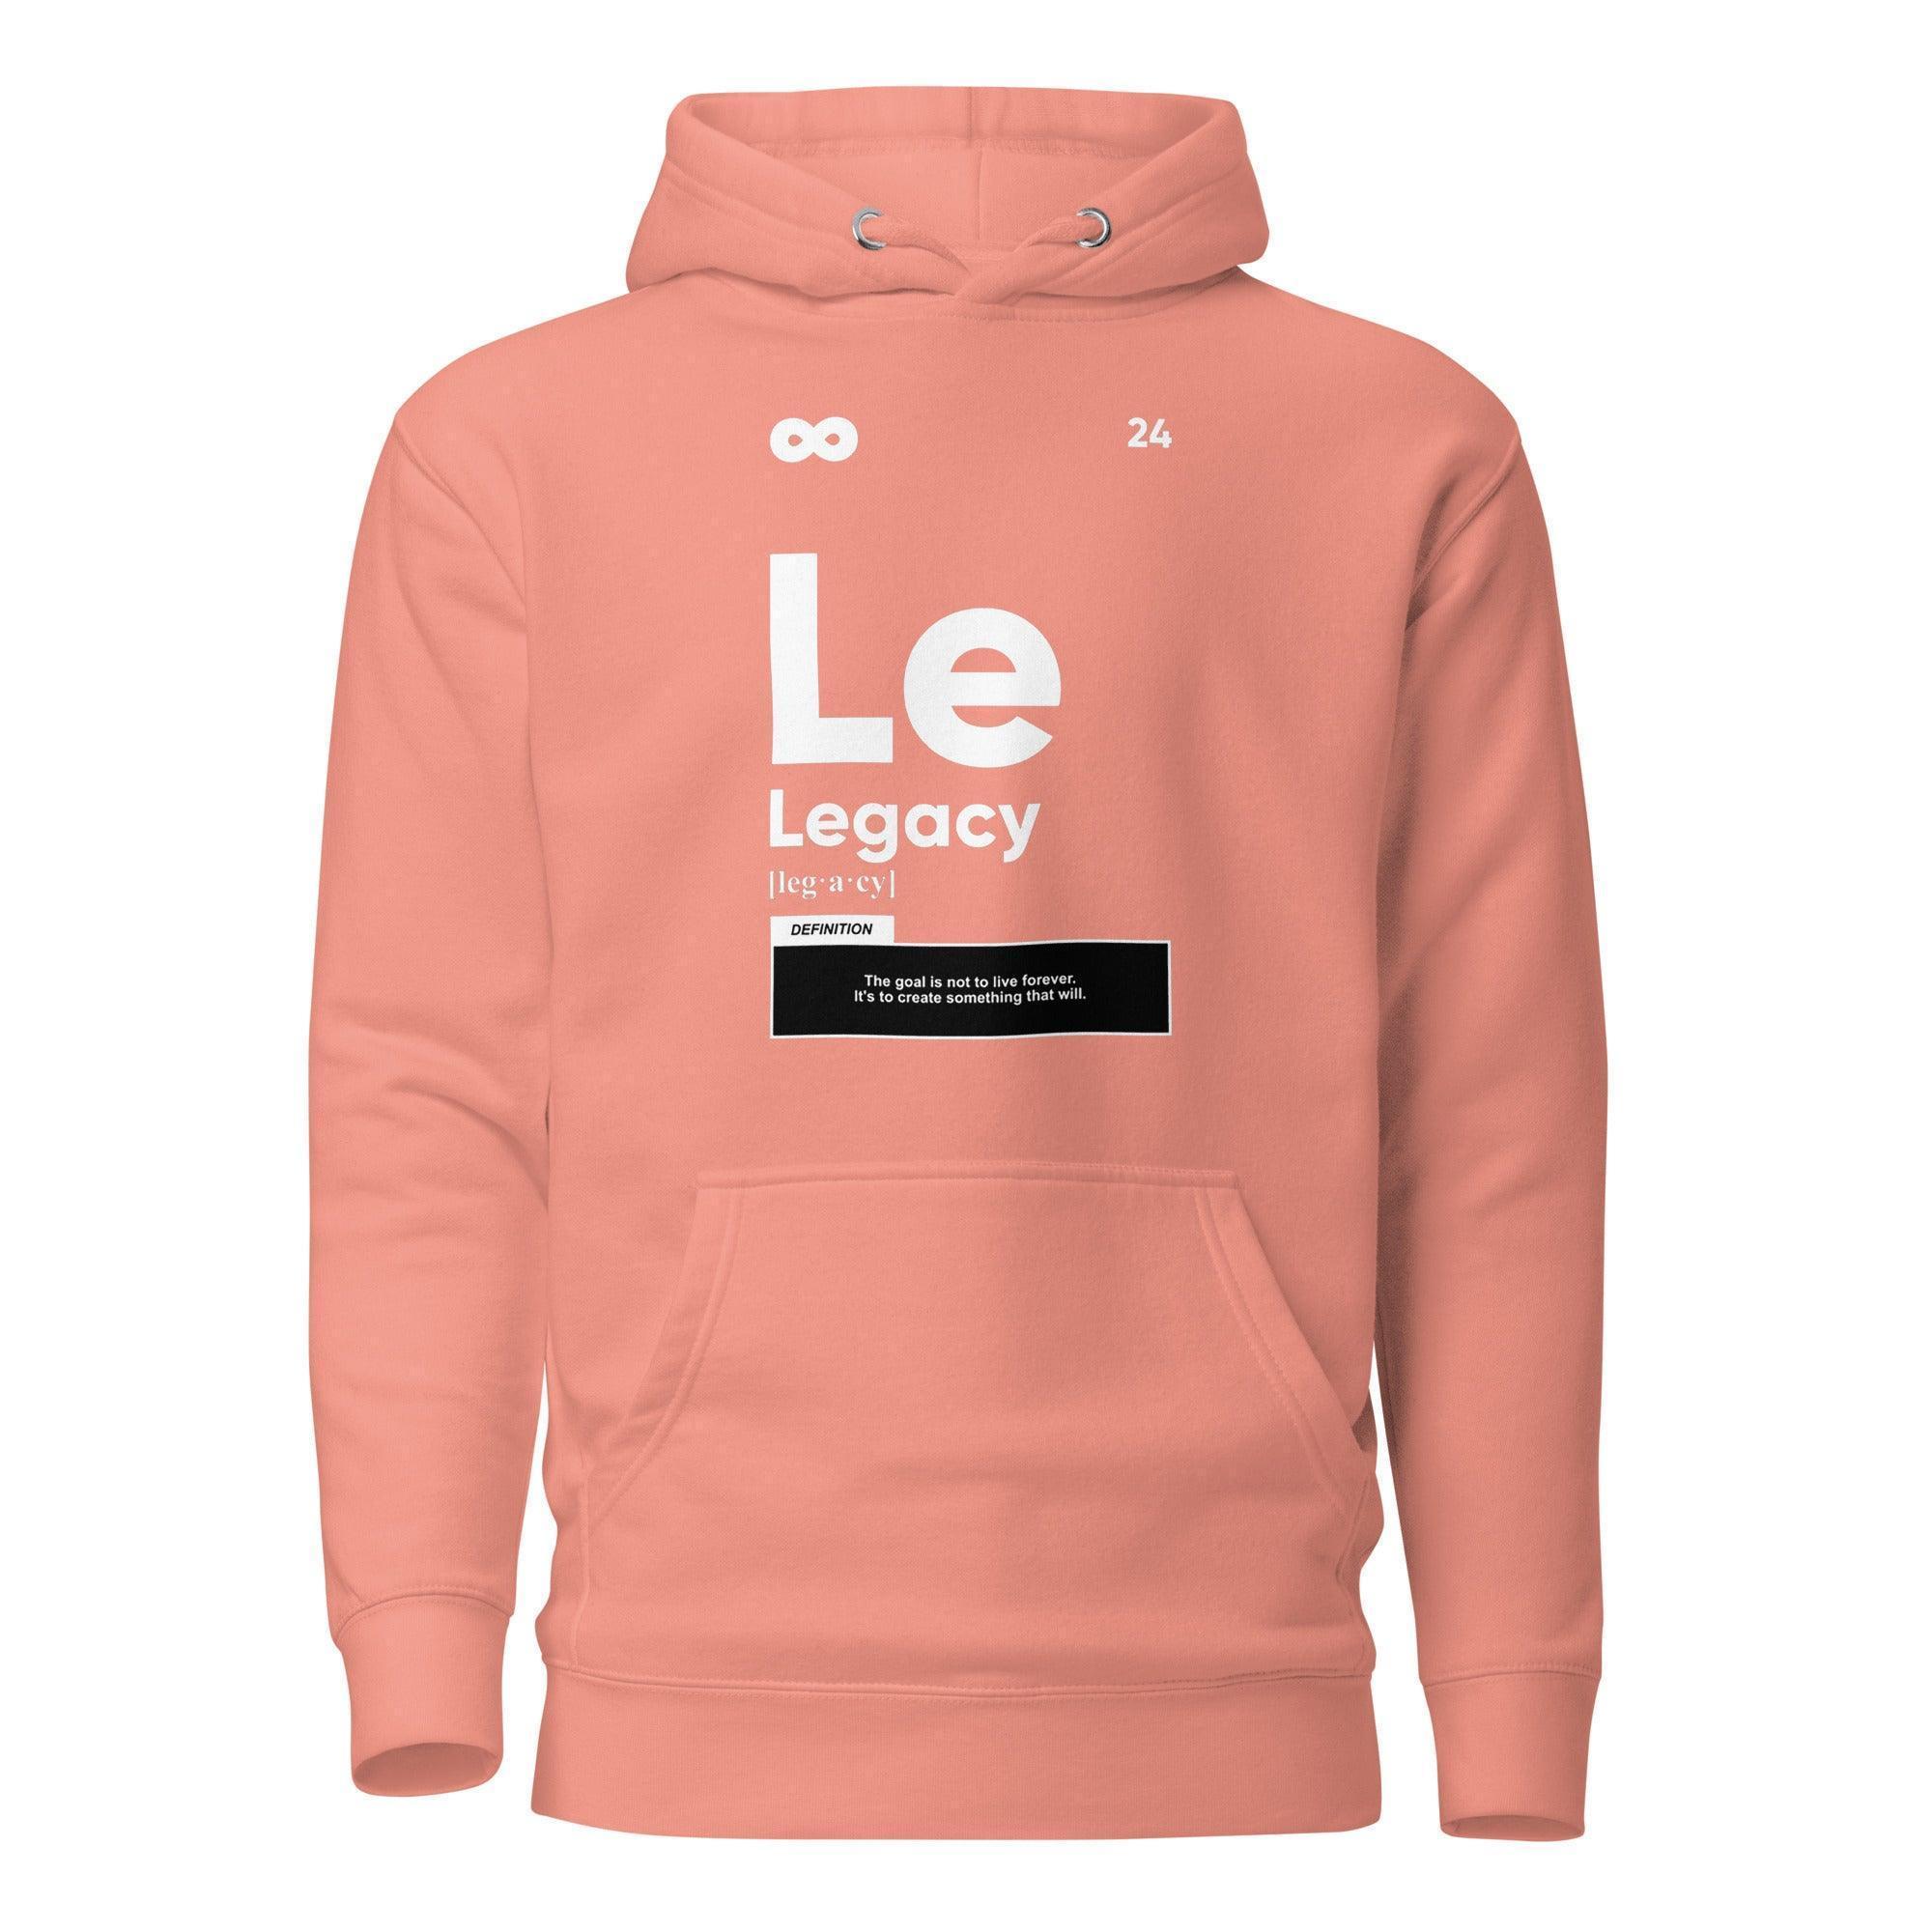 Le Legacy Pullover Hoodie - InvestmenTees